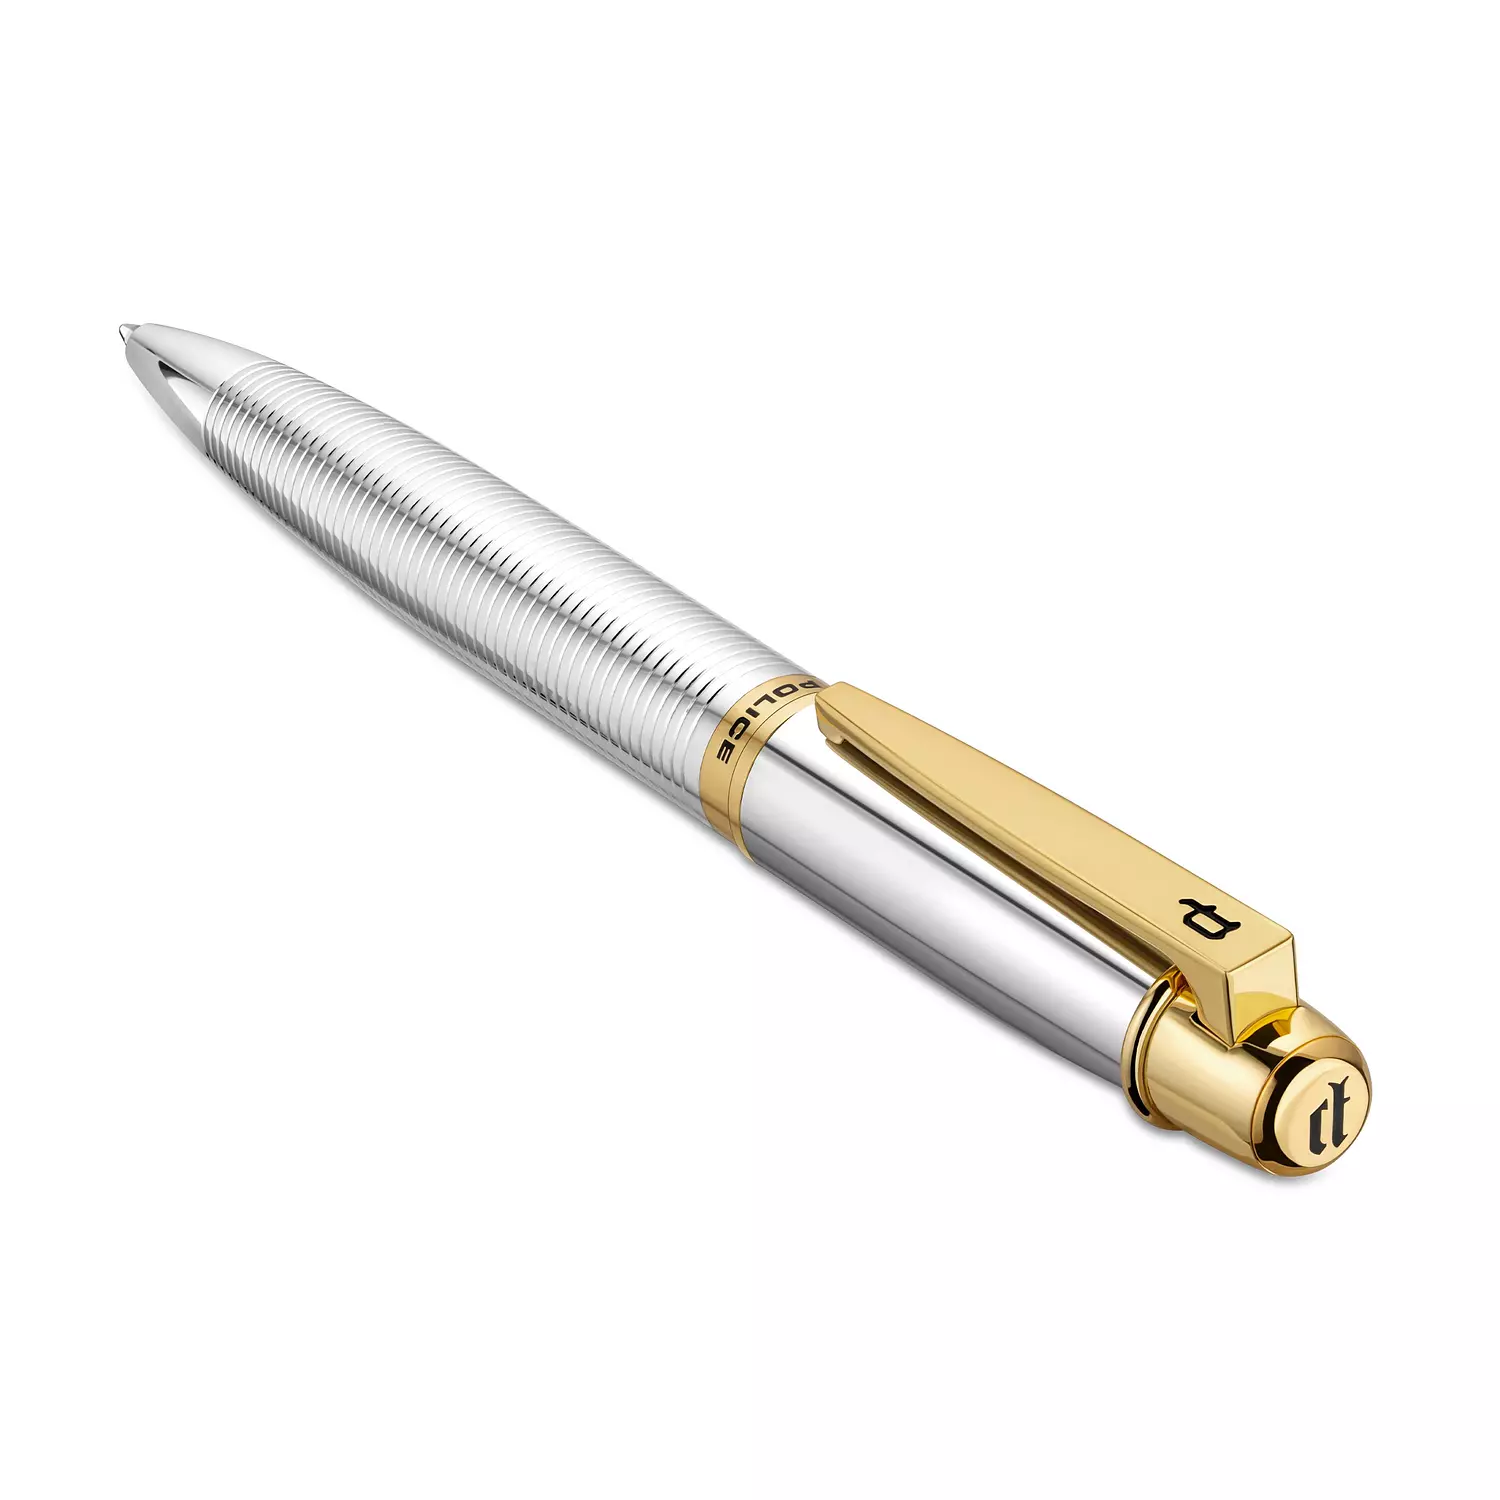 Police Pen For Men- Silver and Gold Color -Ball Point - PERGR0001404 1